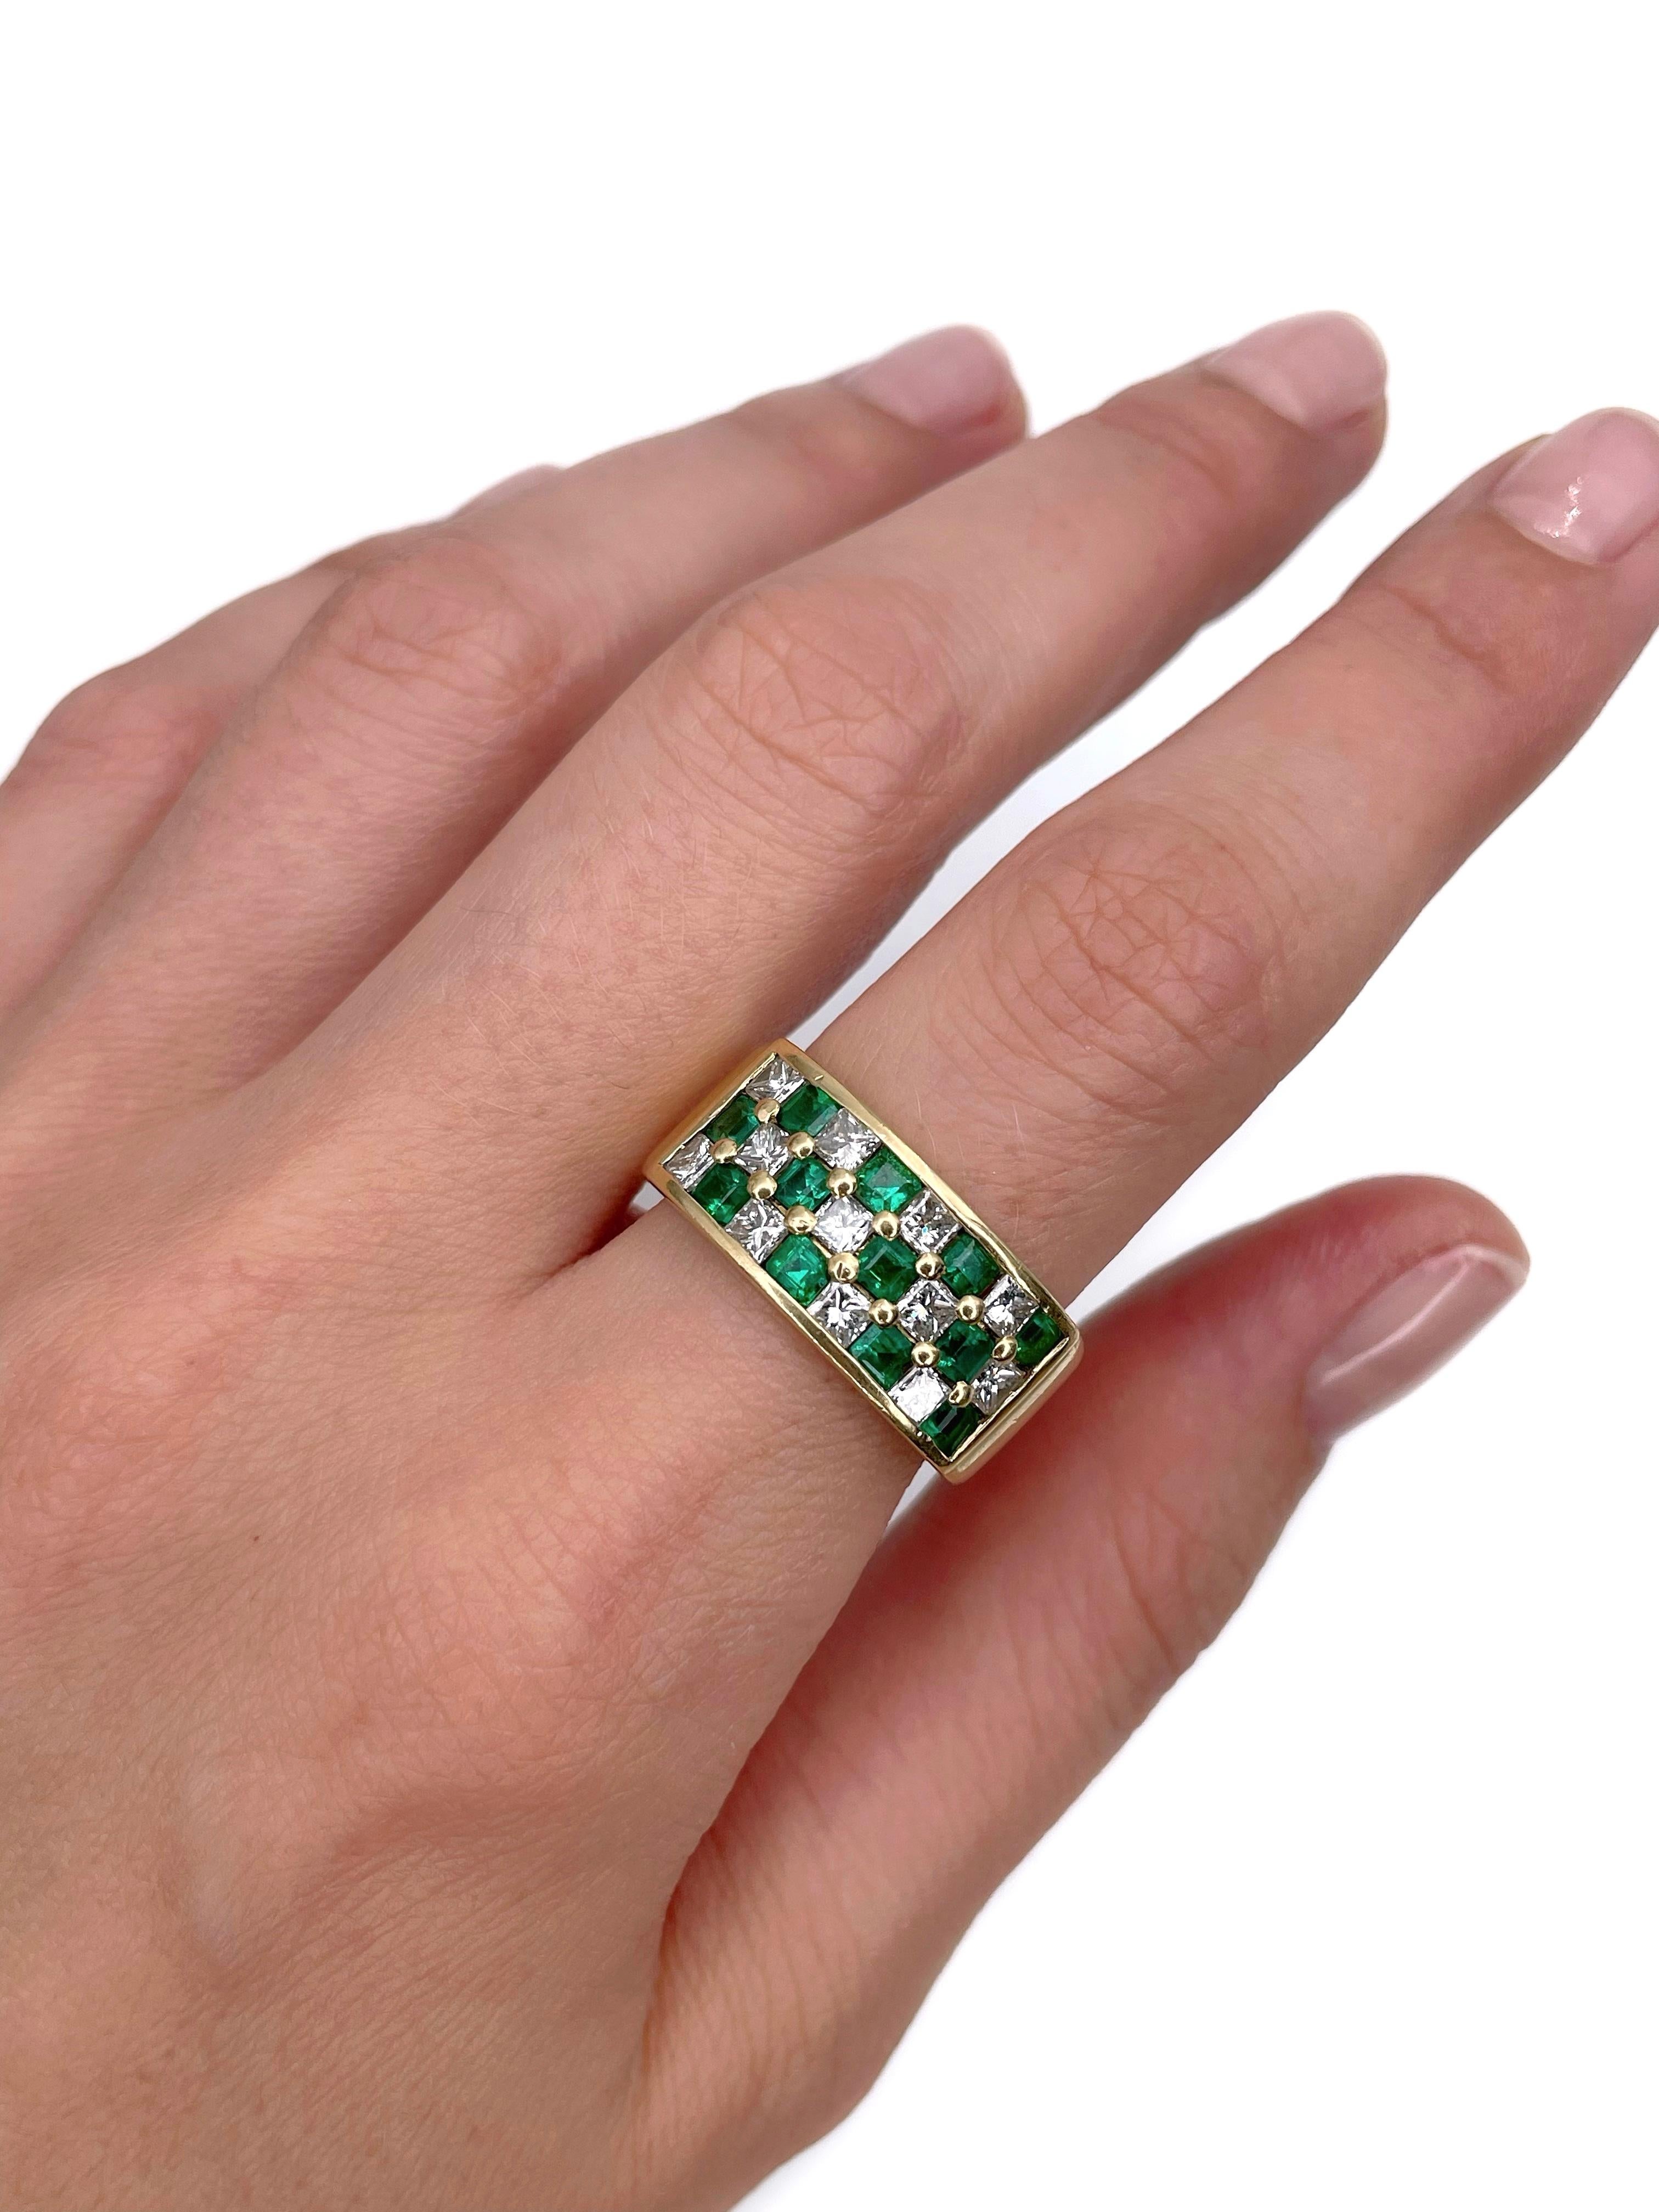 This is a vintage wide band ring crafted in 18K yellow gold. Circa 1980. 

The piece features:
- 12 emeralds (square emerald cut, TW 1.00ct, vslbG 5/5, SI)
- 12 diamonds (princess cut, TW 1.25ct, RW-W, VS-SI)

Weight: 15.24g
Size: 18.5 (US